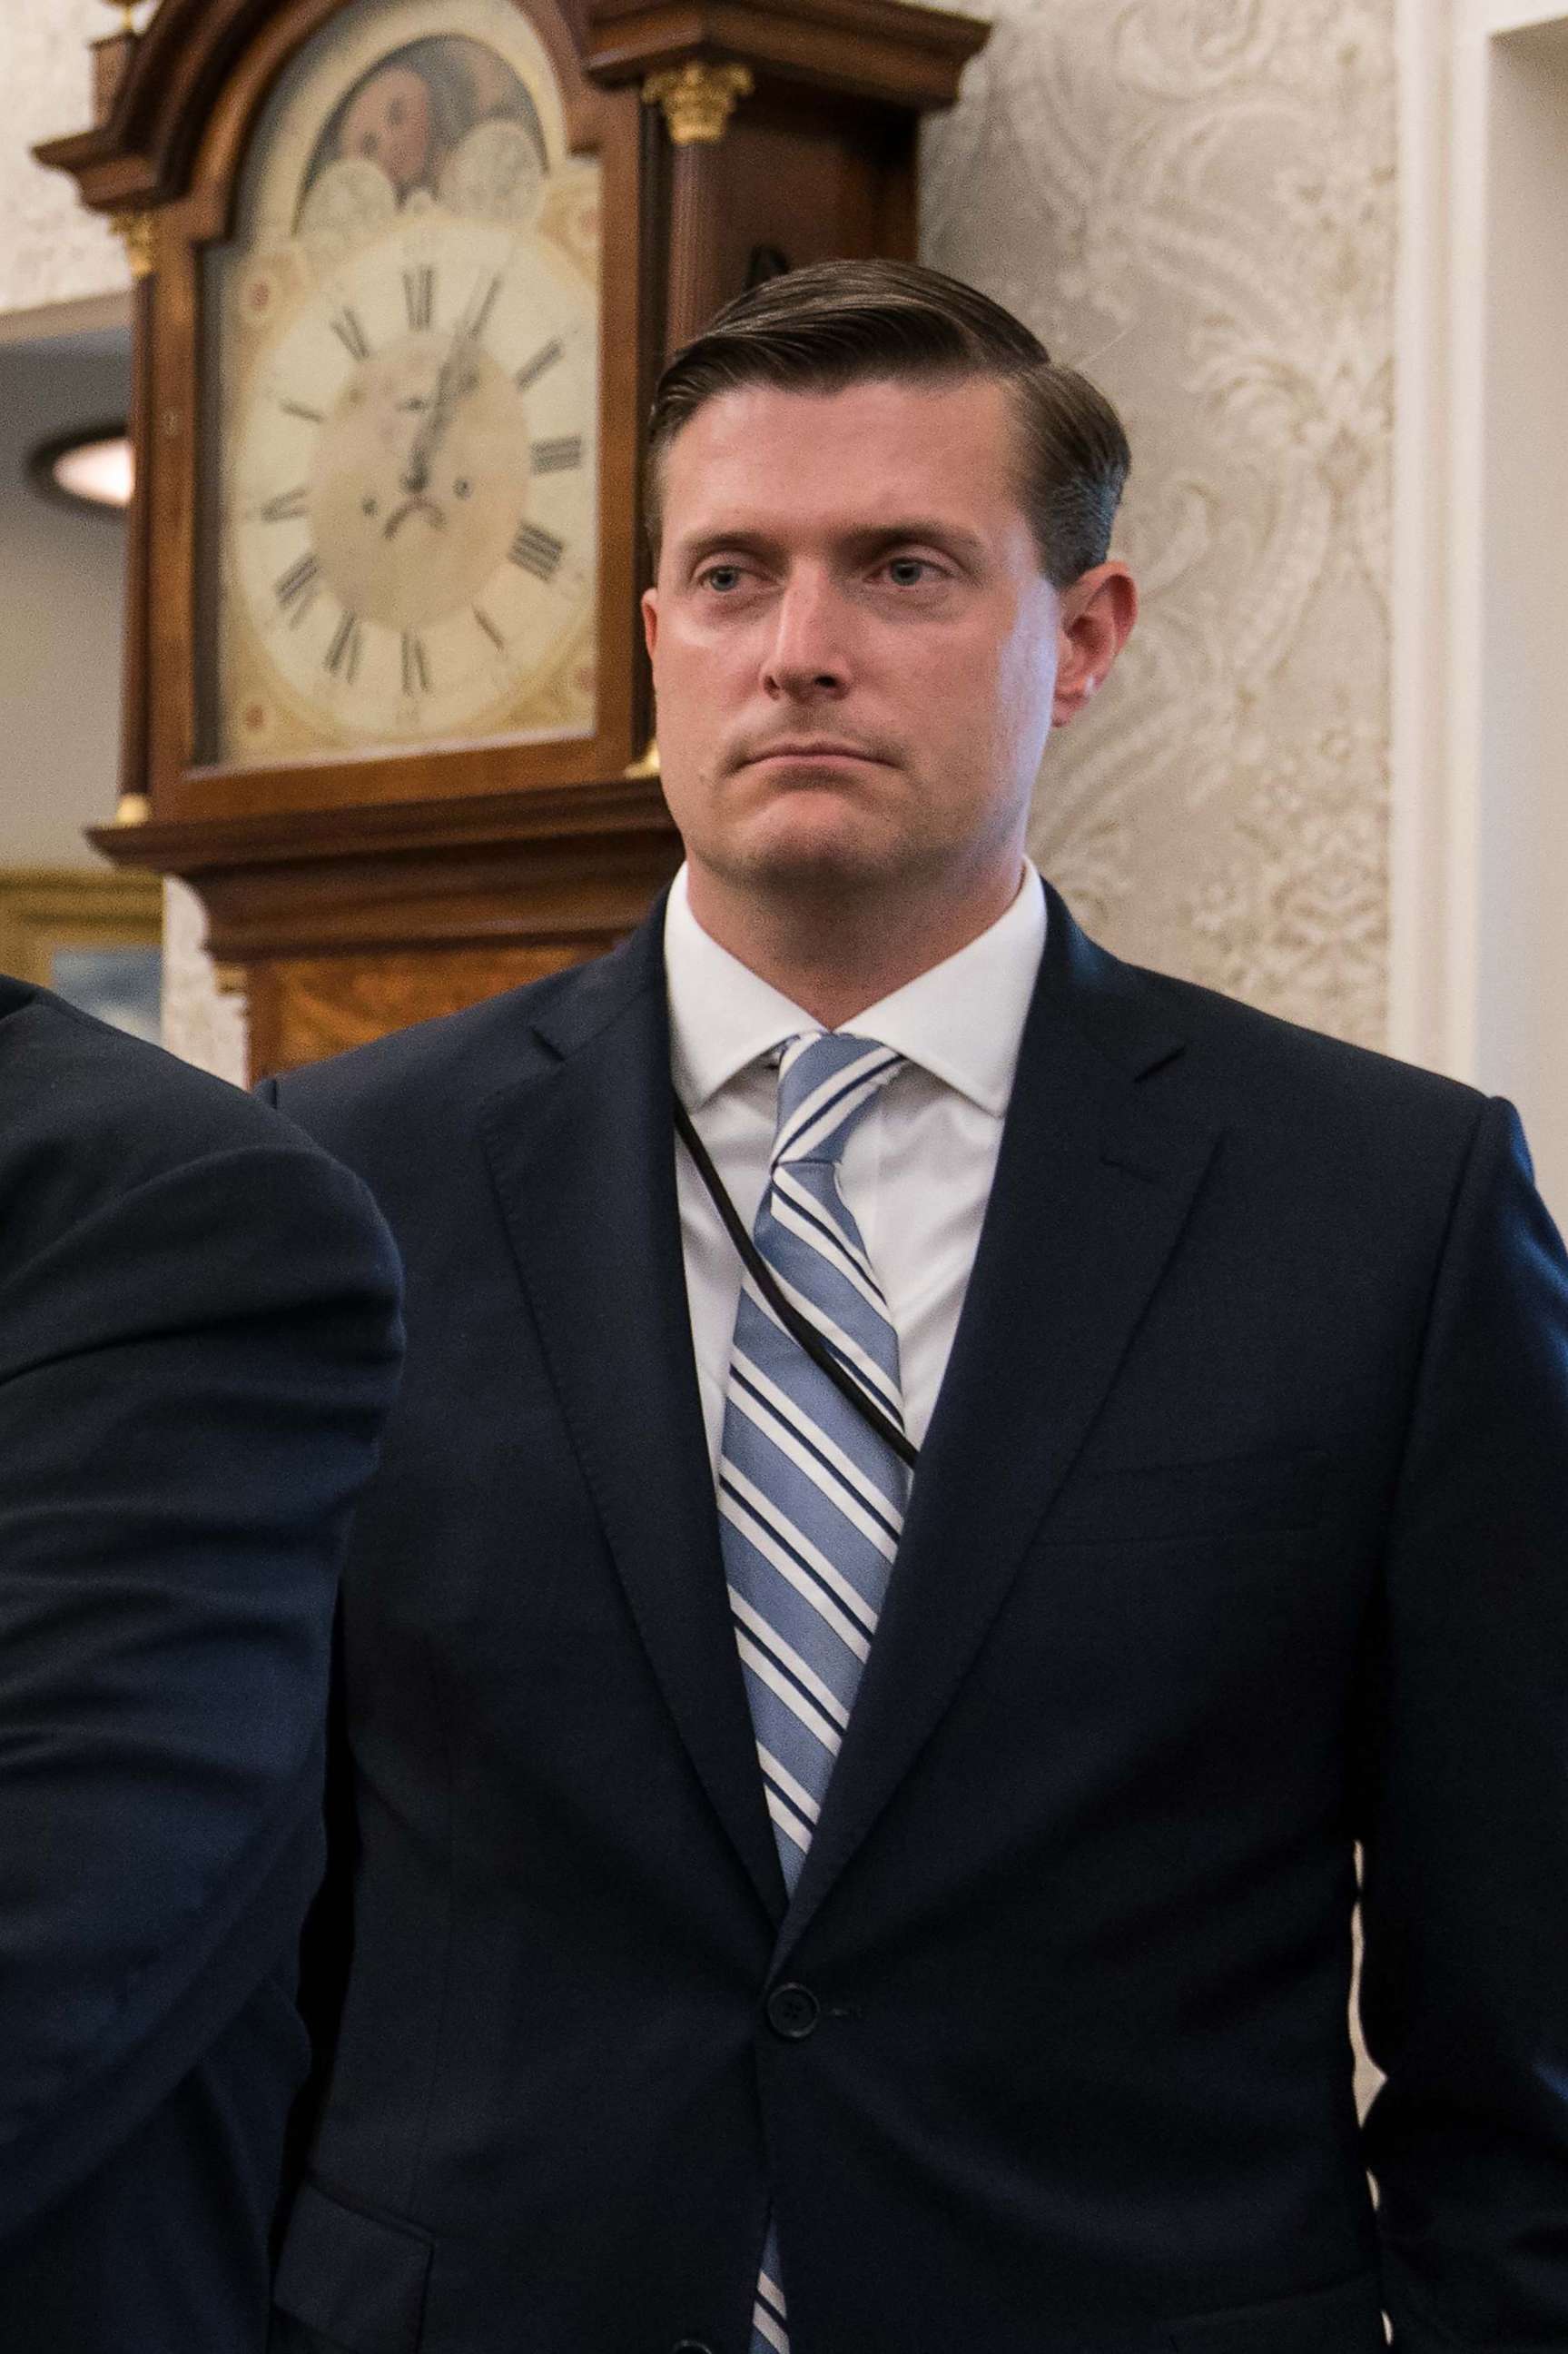 PHOTO: White House staff secretary Rob Porter looks on after President Donald Trump signed a proclamation in the Oval Office at the White House in Washington, D.C., Sept. 1, 2017.